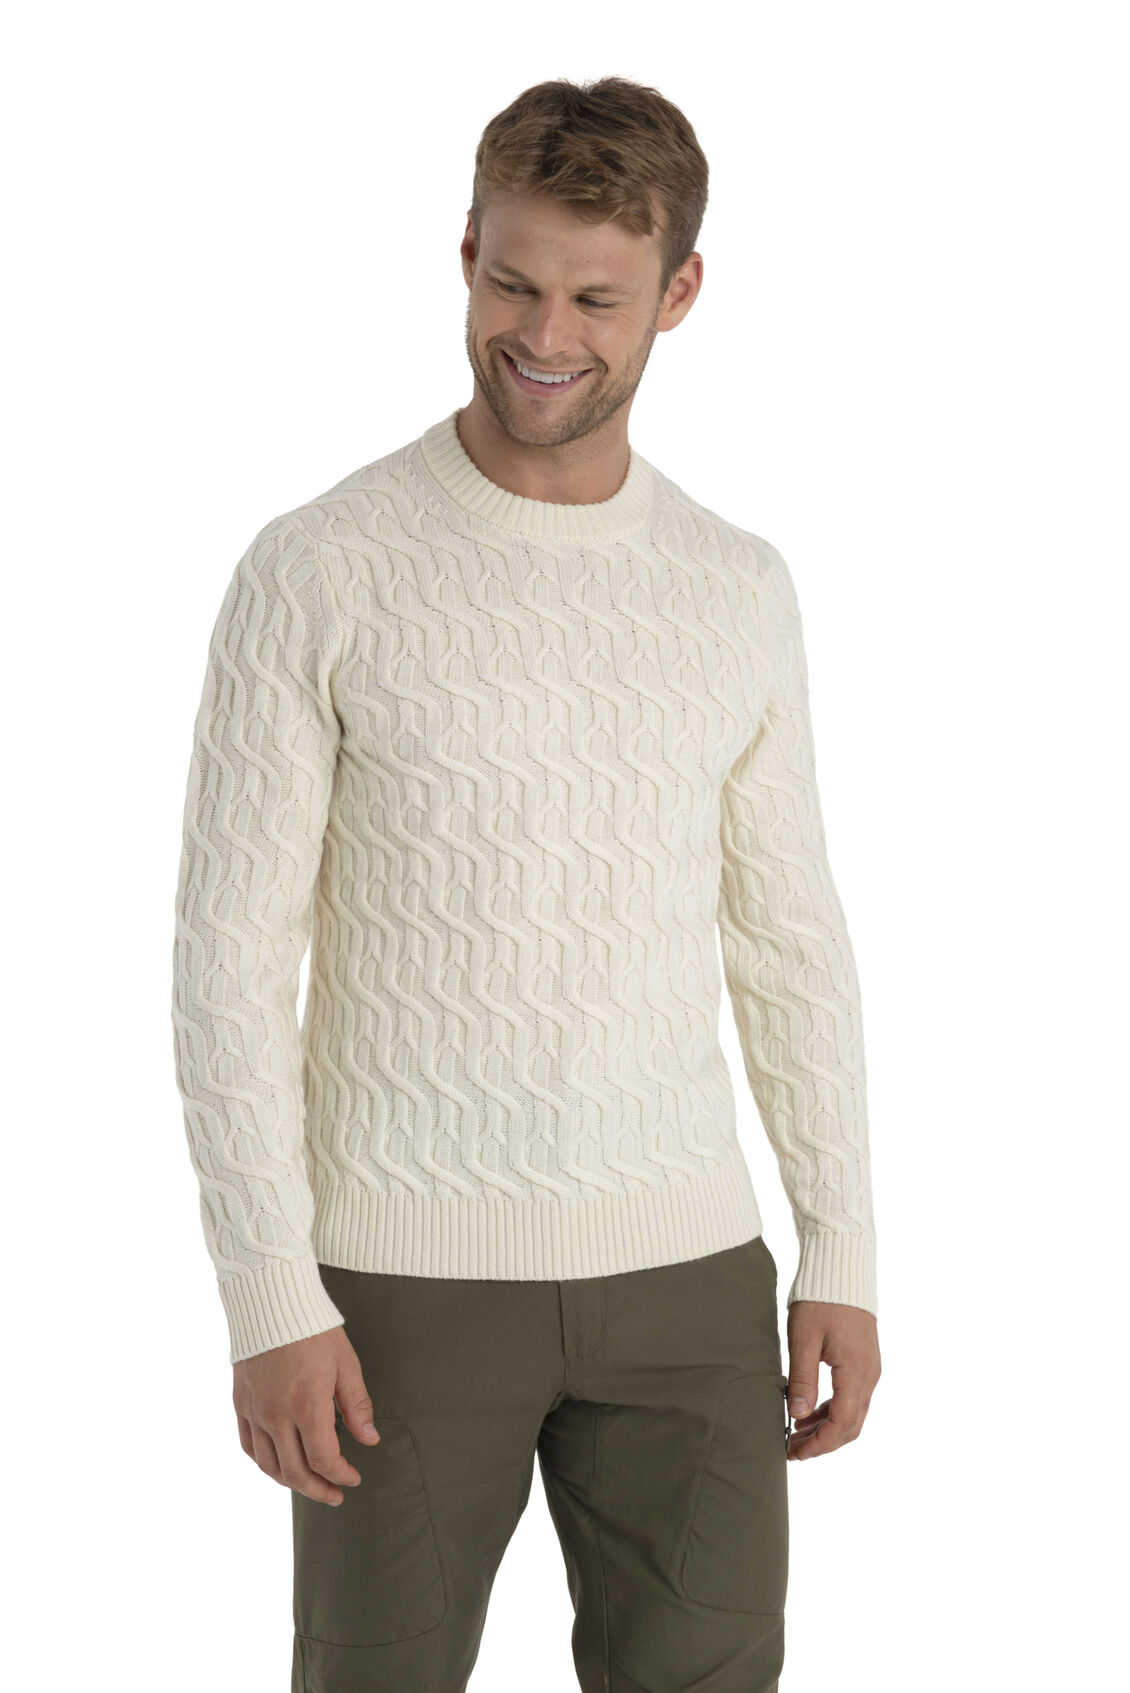 Mens Merino Cable Knit Crewe Sweater Ideal for winter travel and cold, snowy days around town, the Merino Cable Knit Crewe Sweater provides classic style with the natural benefits of 100% merino wool.